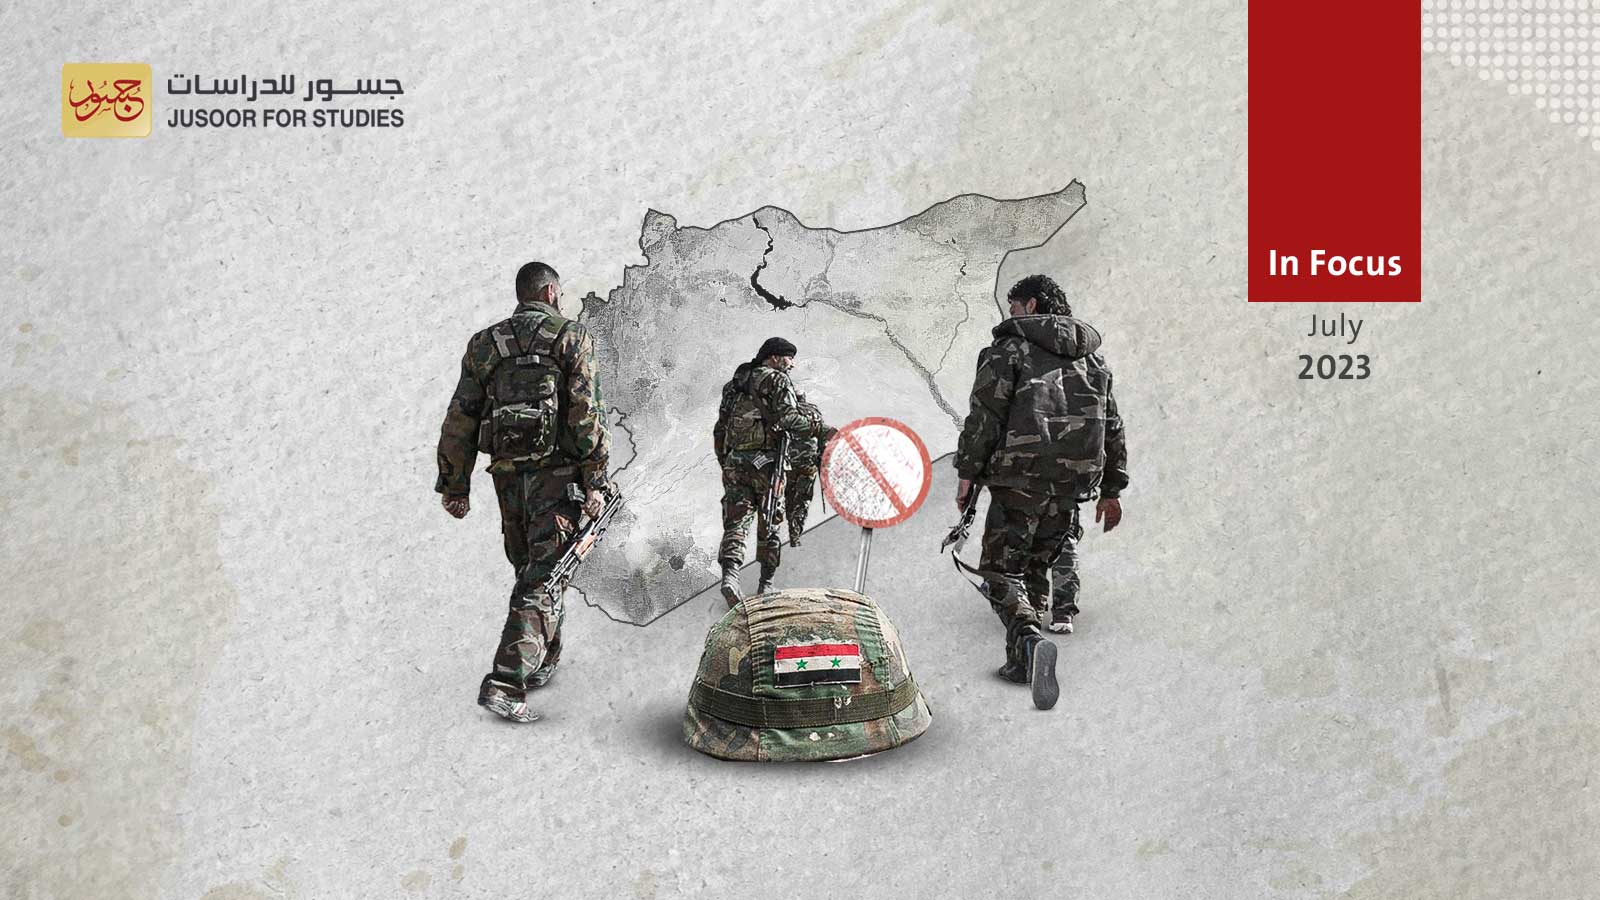 Implications of Ending Retention and Recall for Some Categories in the Syrian Regime Forces